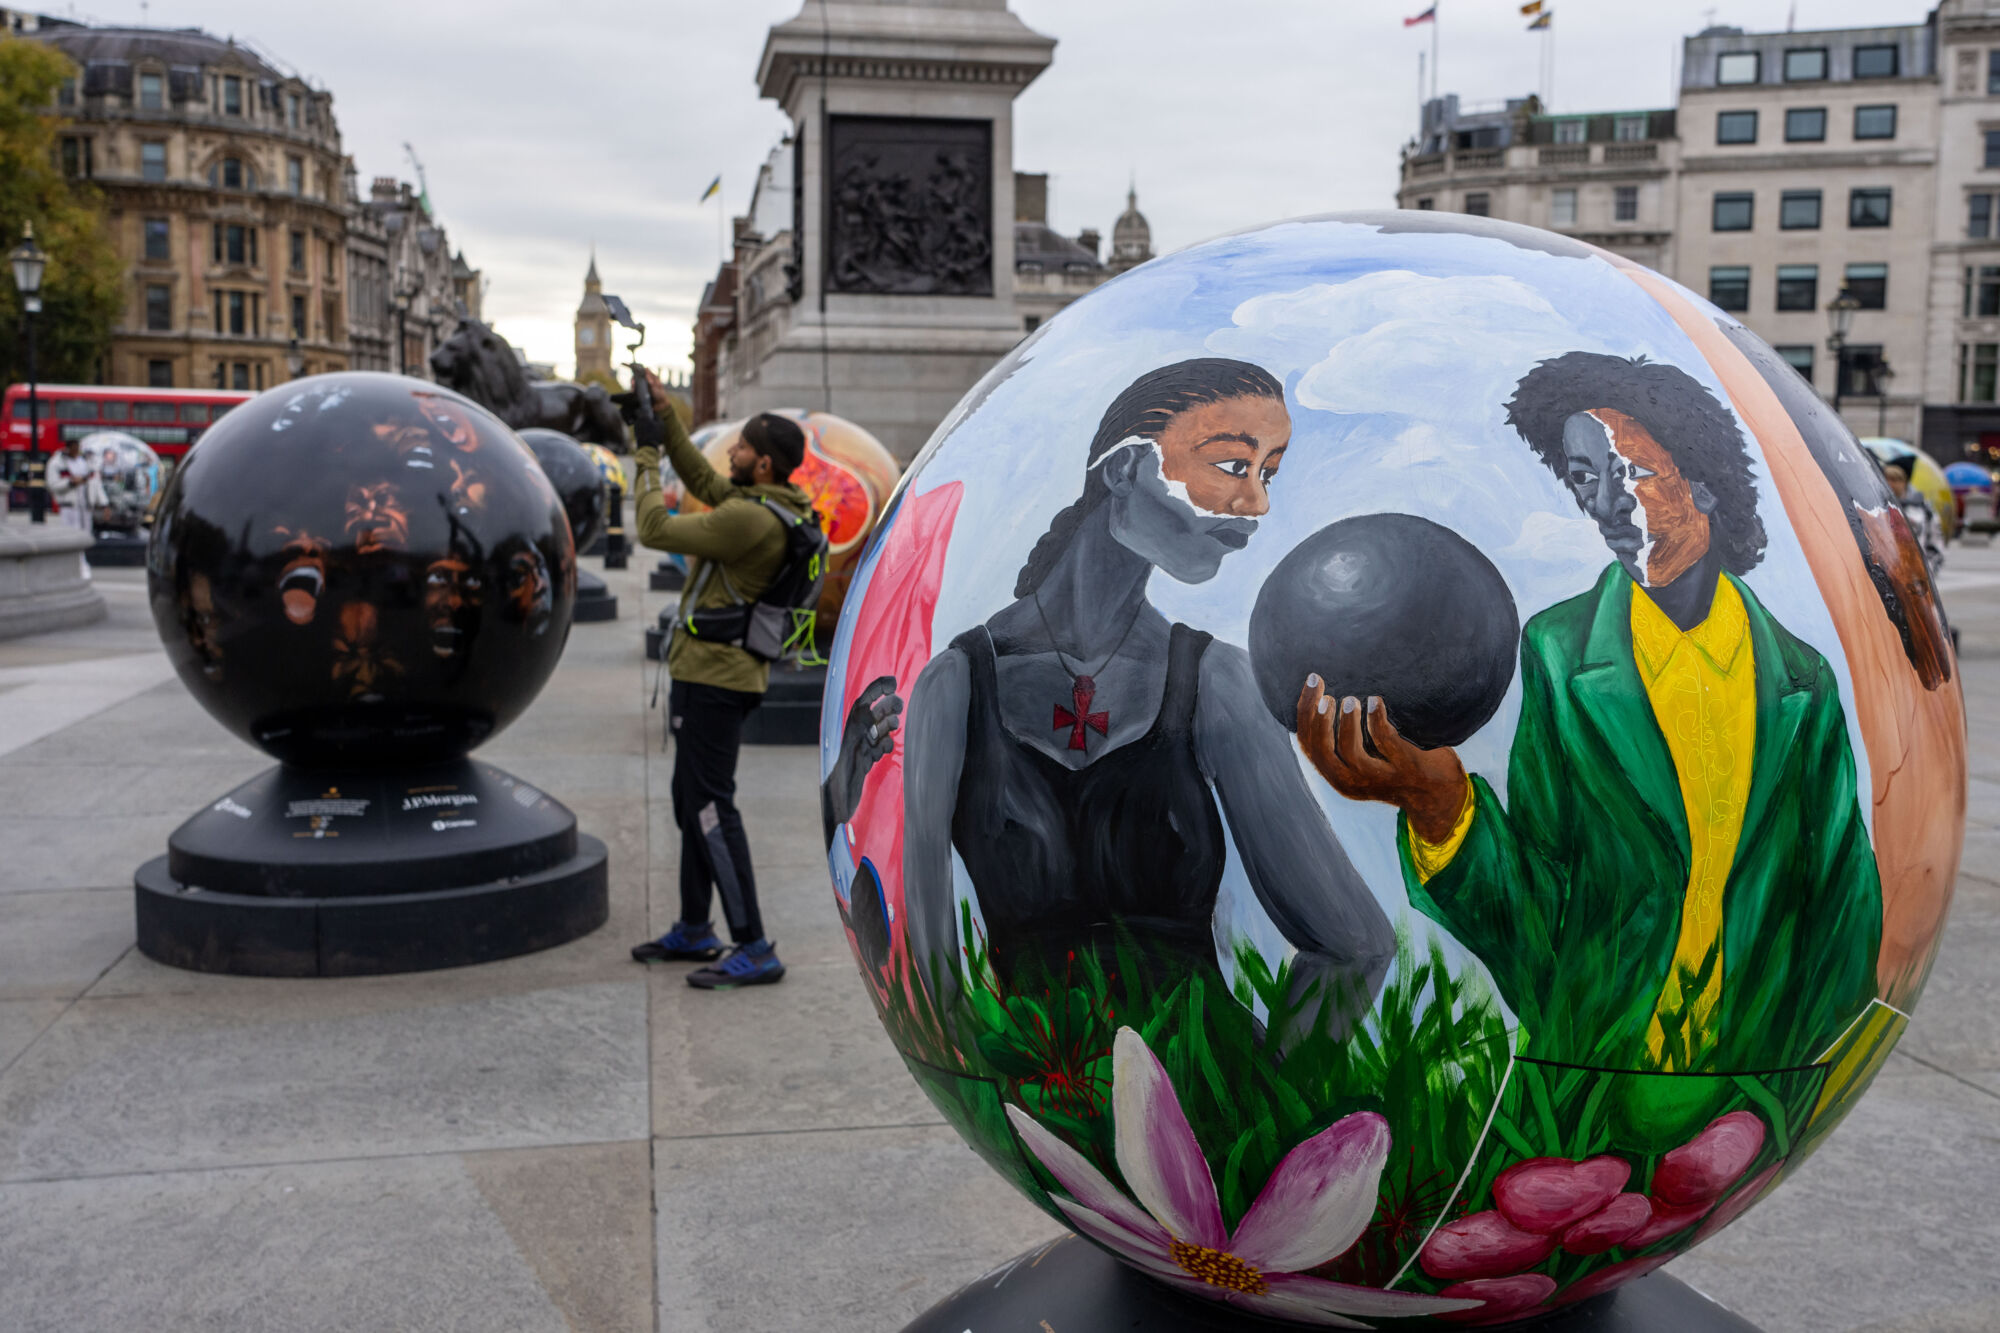 The Wick - FREE EDITORIAL & ONLINE USE  © Jeff Moore

The World Reimagined takes over Trafalgar Square with final installation showcase ahead of Bonhams auction. 

96 art education globes designed by acclaimed artists are staged in Trafalgar Square in quest for racial equality, justice and historic recognition. 

18 globes will be auctioned by Bonhams from 17 to 25 November in support of The World Reimagined project.